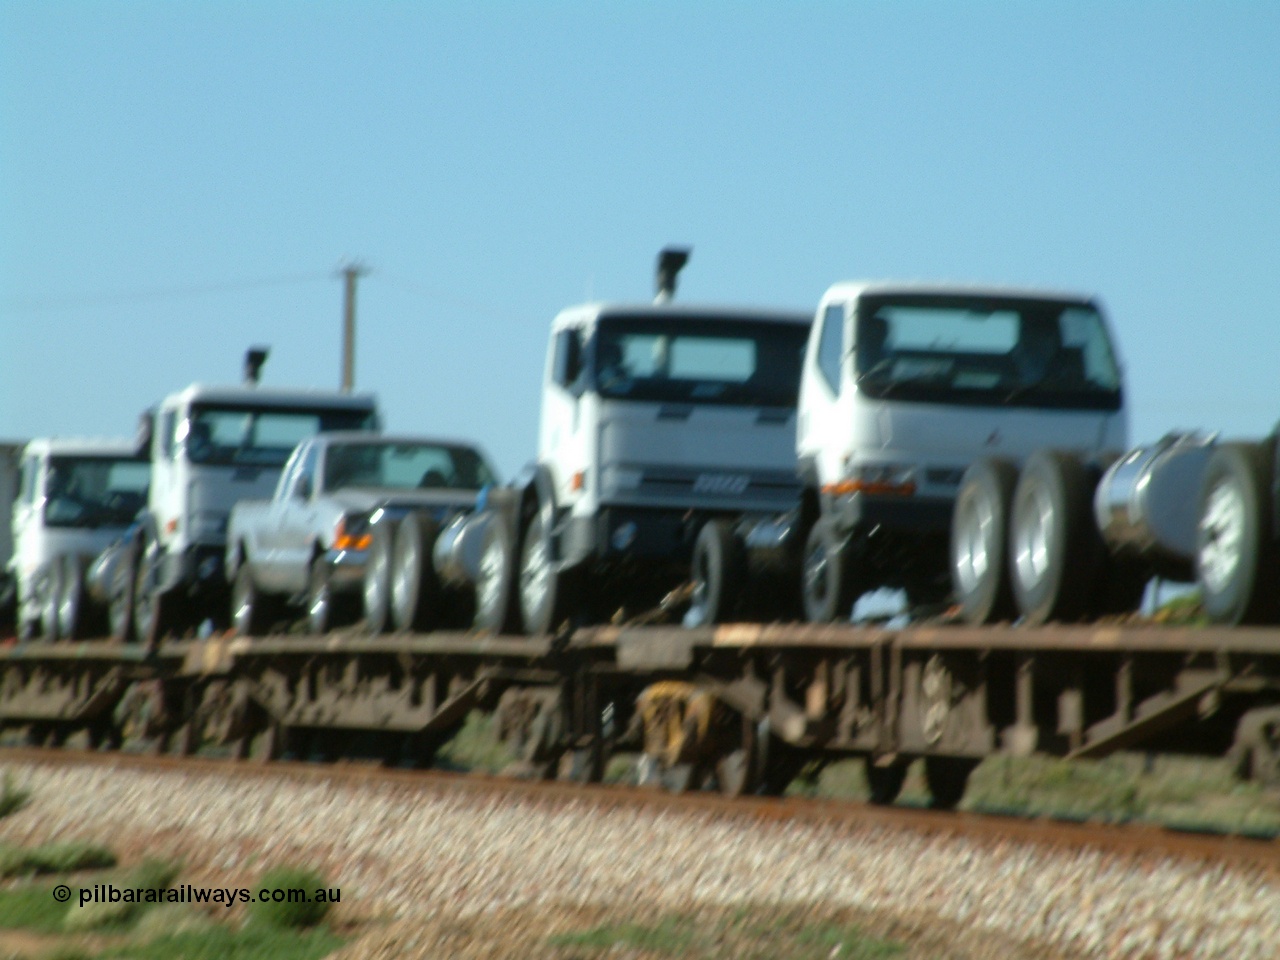 030404 082847
Port Germein, Perth bound steel and intermodal hurries through on the main, out of focus shot of new vehicles loaded on flat waggons. 4th April 2003.
